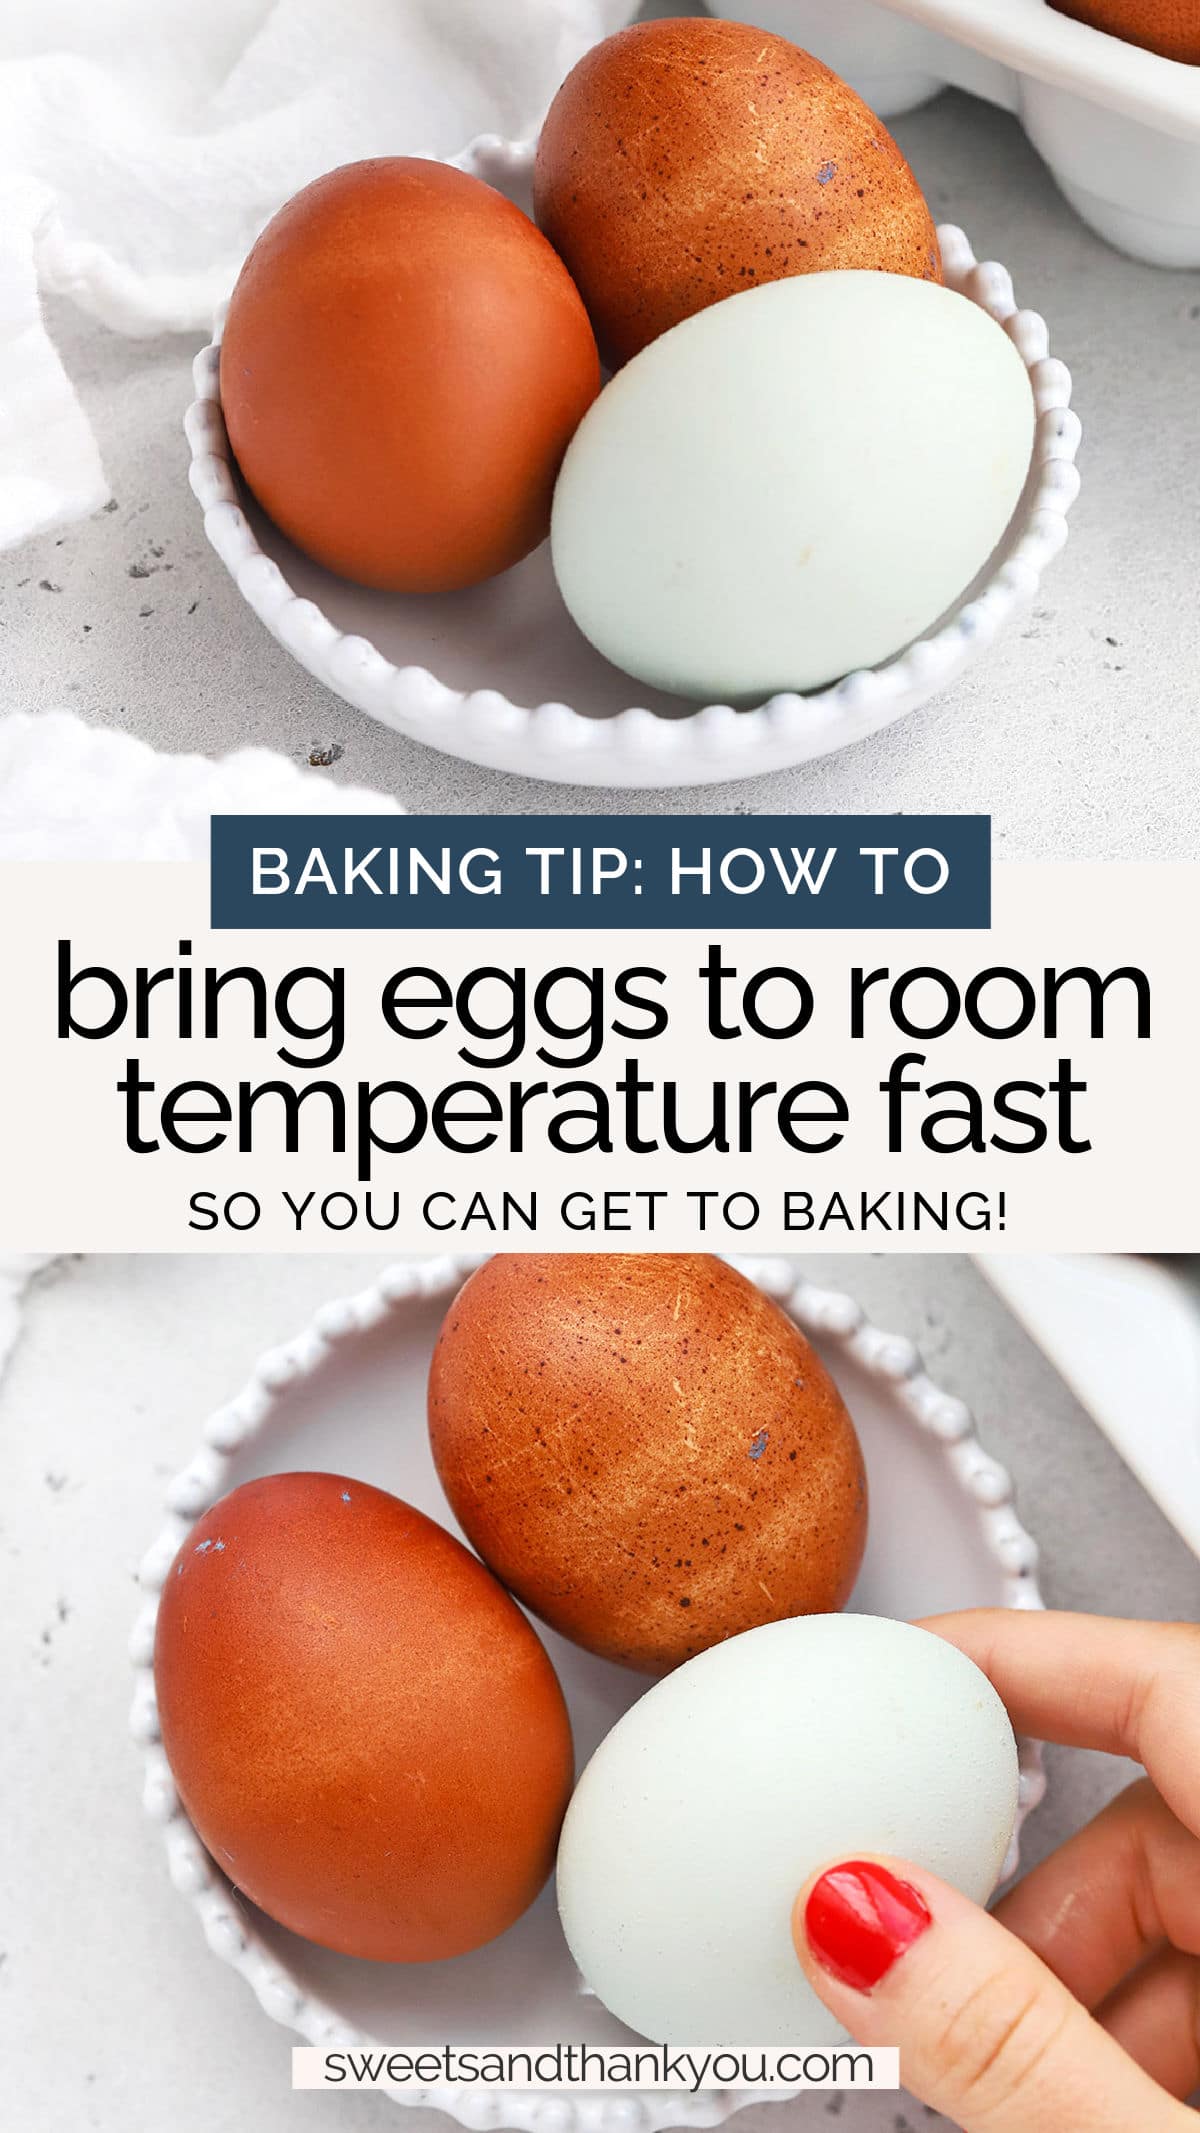 How To Get Eggs To Room Temperature Quickly - Learn the best trick for getting eggs to room temperature quickly & why room temperature eggs are important! / how long does it take eggs to get to room temperature / water trick for bringing eggs to room temperature / how to bring separated eggs to room temperature / when you need to use room temperature eggs / what temperature are room temperature eggs / when can you use cold eggs / how to tell eggs are room temperature